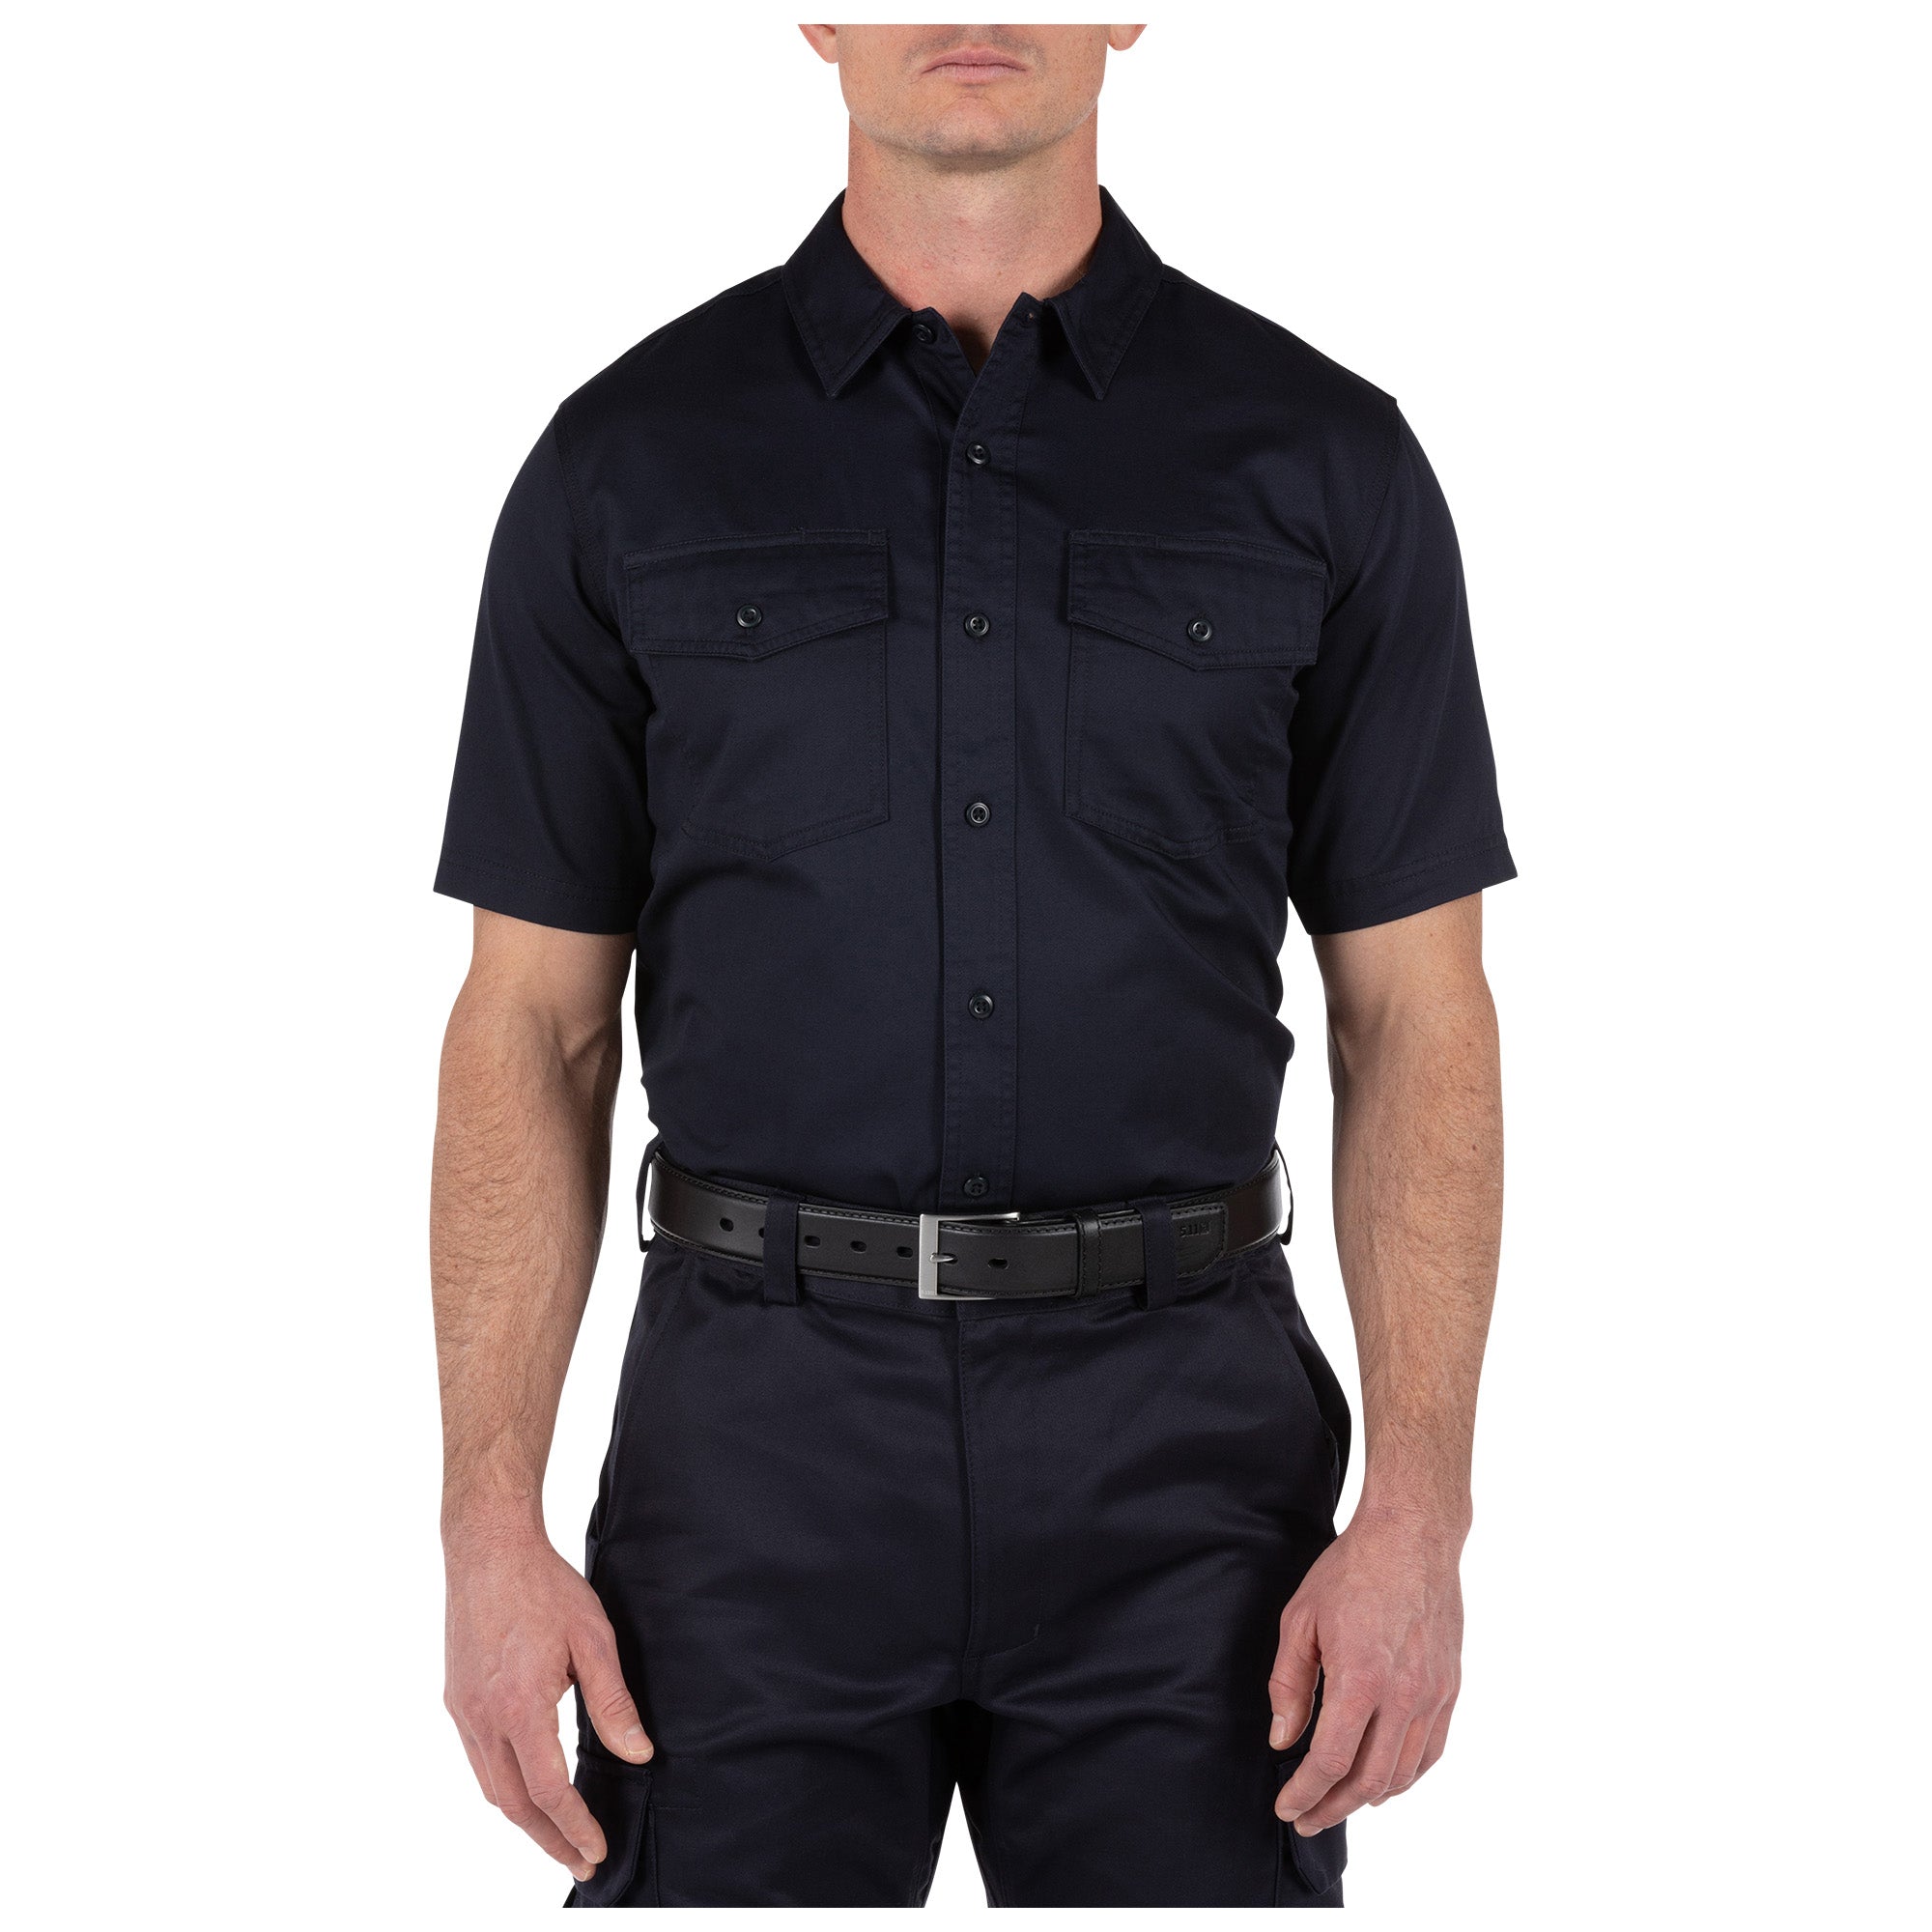 5.11 Tactical Company Short Sleeve Shirt Fire Navy Outerwear 5.11 Tactical Small Tactical Gear Supplier Tactical Distributors Australia